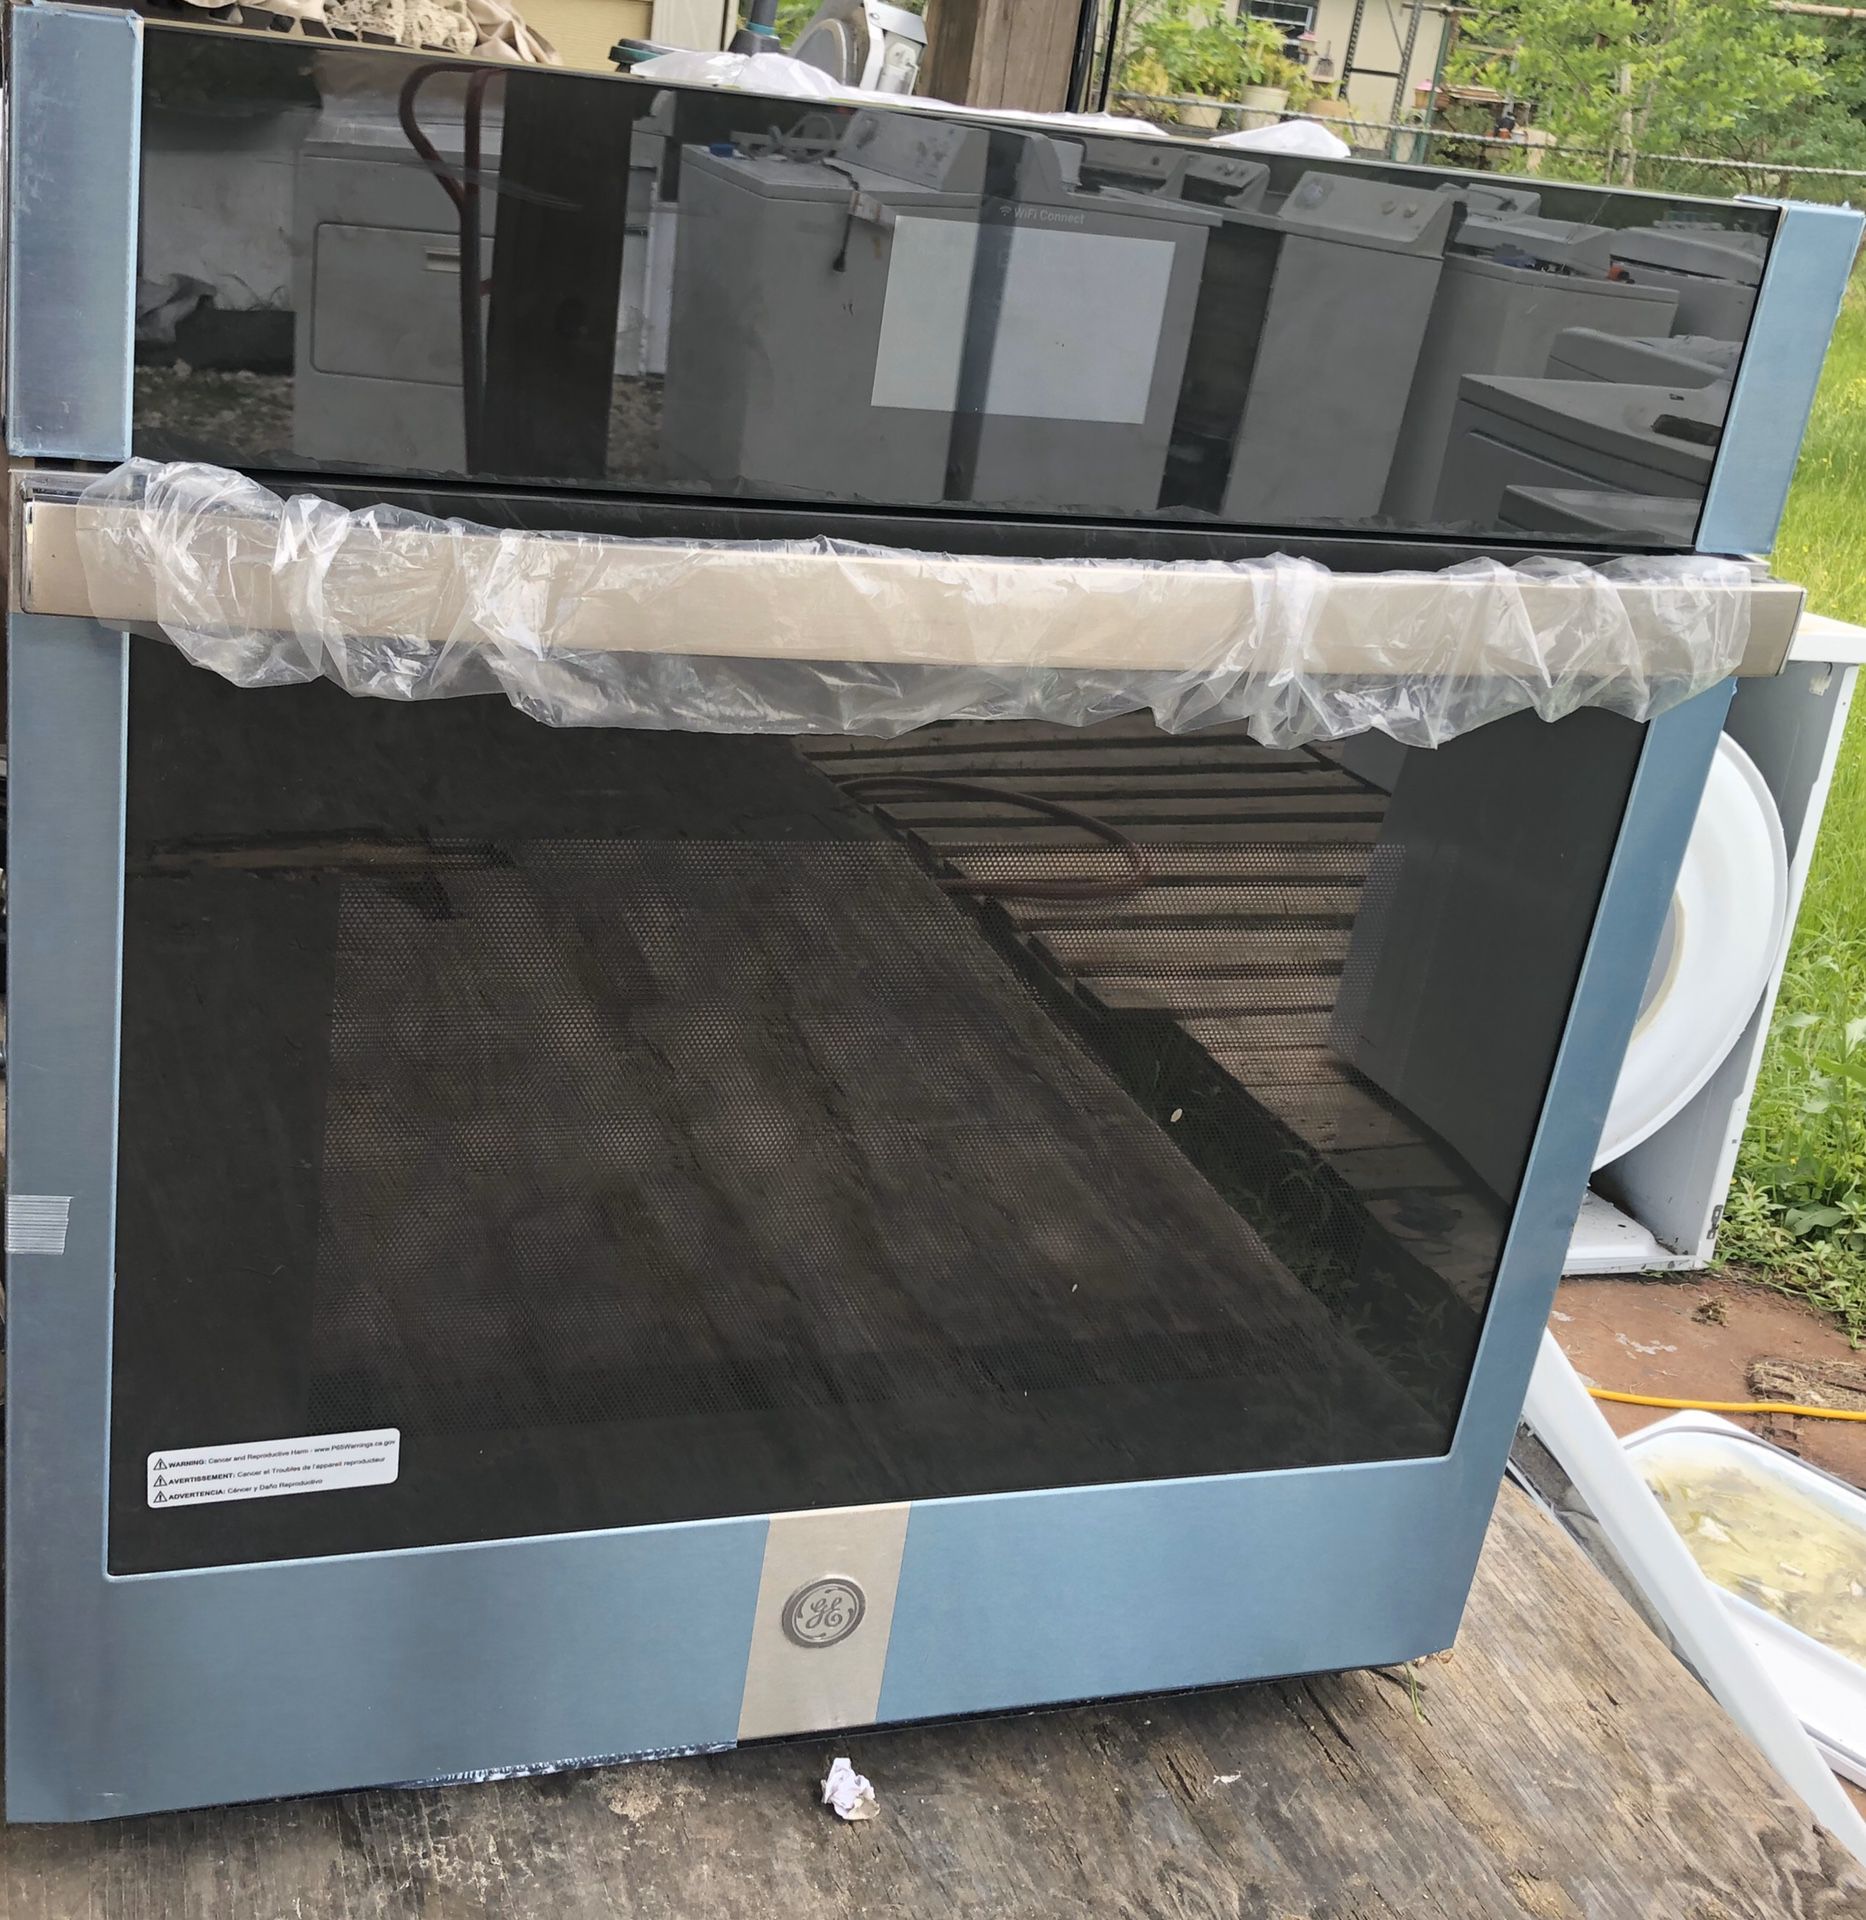 Brand new scratch and dent Ge stainless steel smart wall oven!